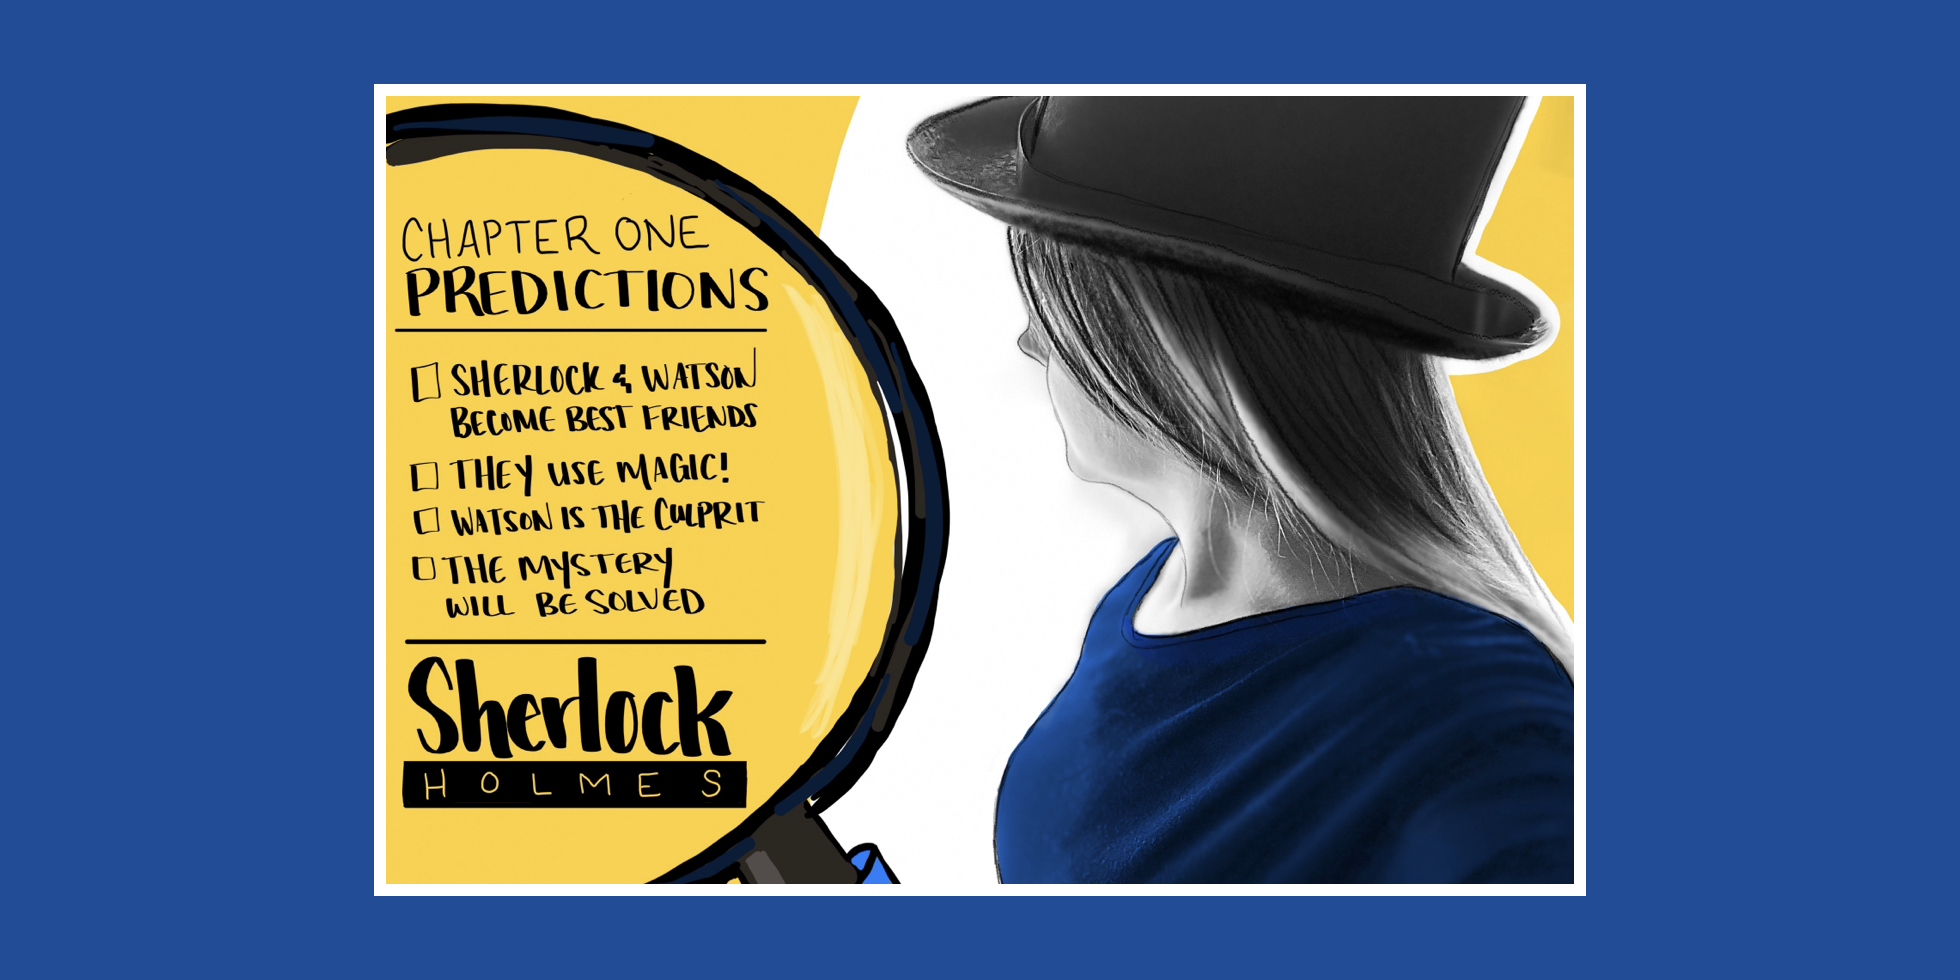 Image shows a woman in profile, wearing a hat, with predictions for chapters of the book "Sherlock Holmes."